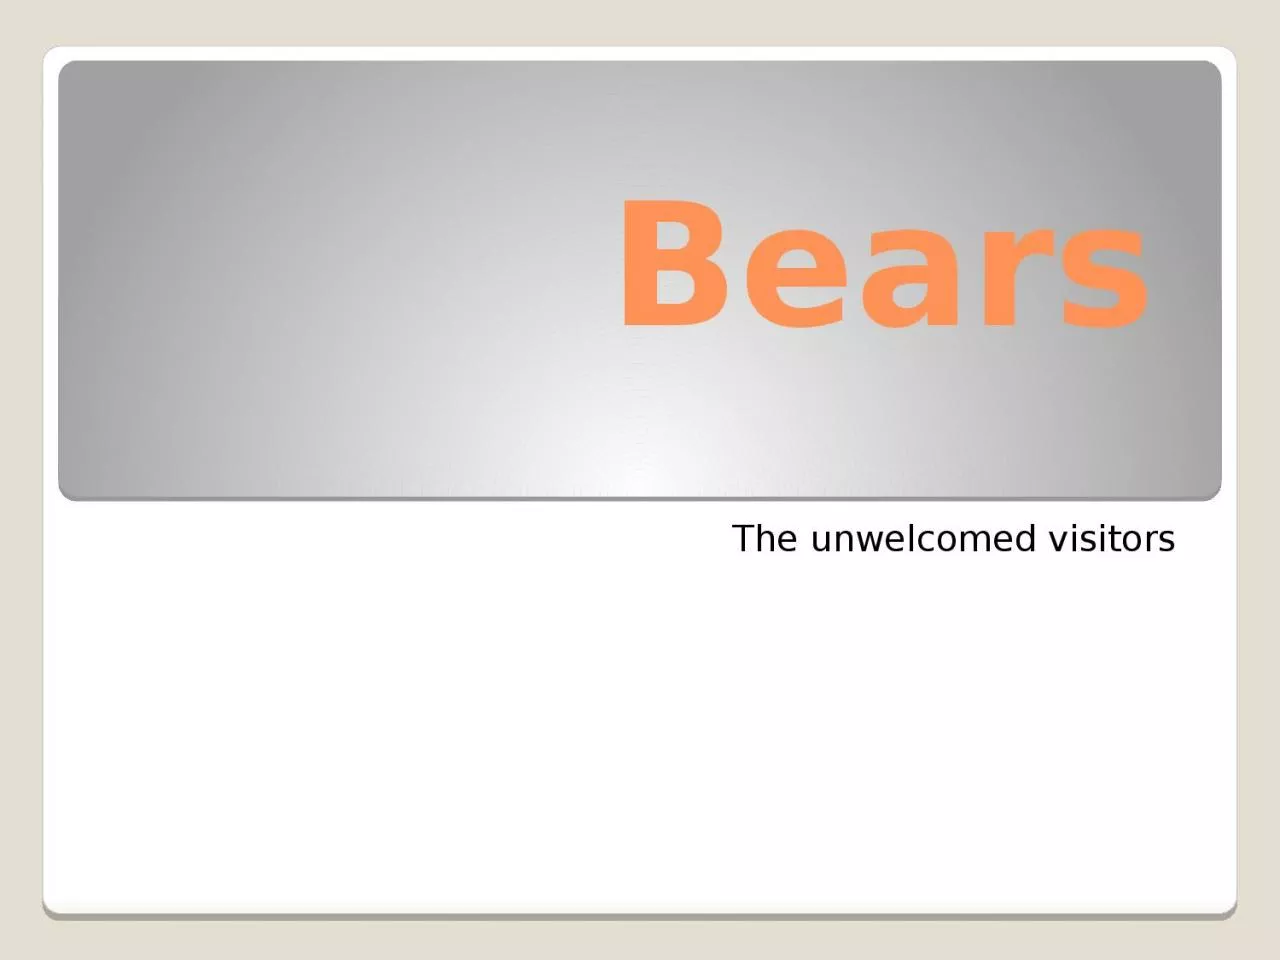 Bears The unwelcomed visitors